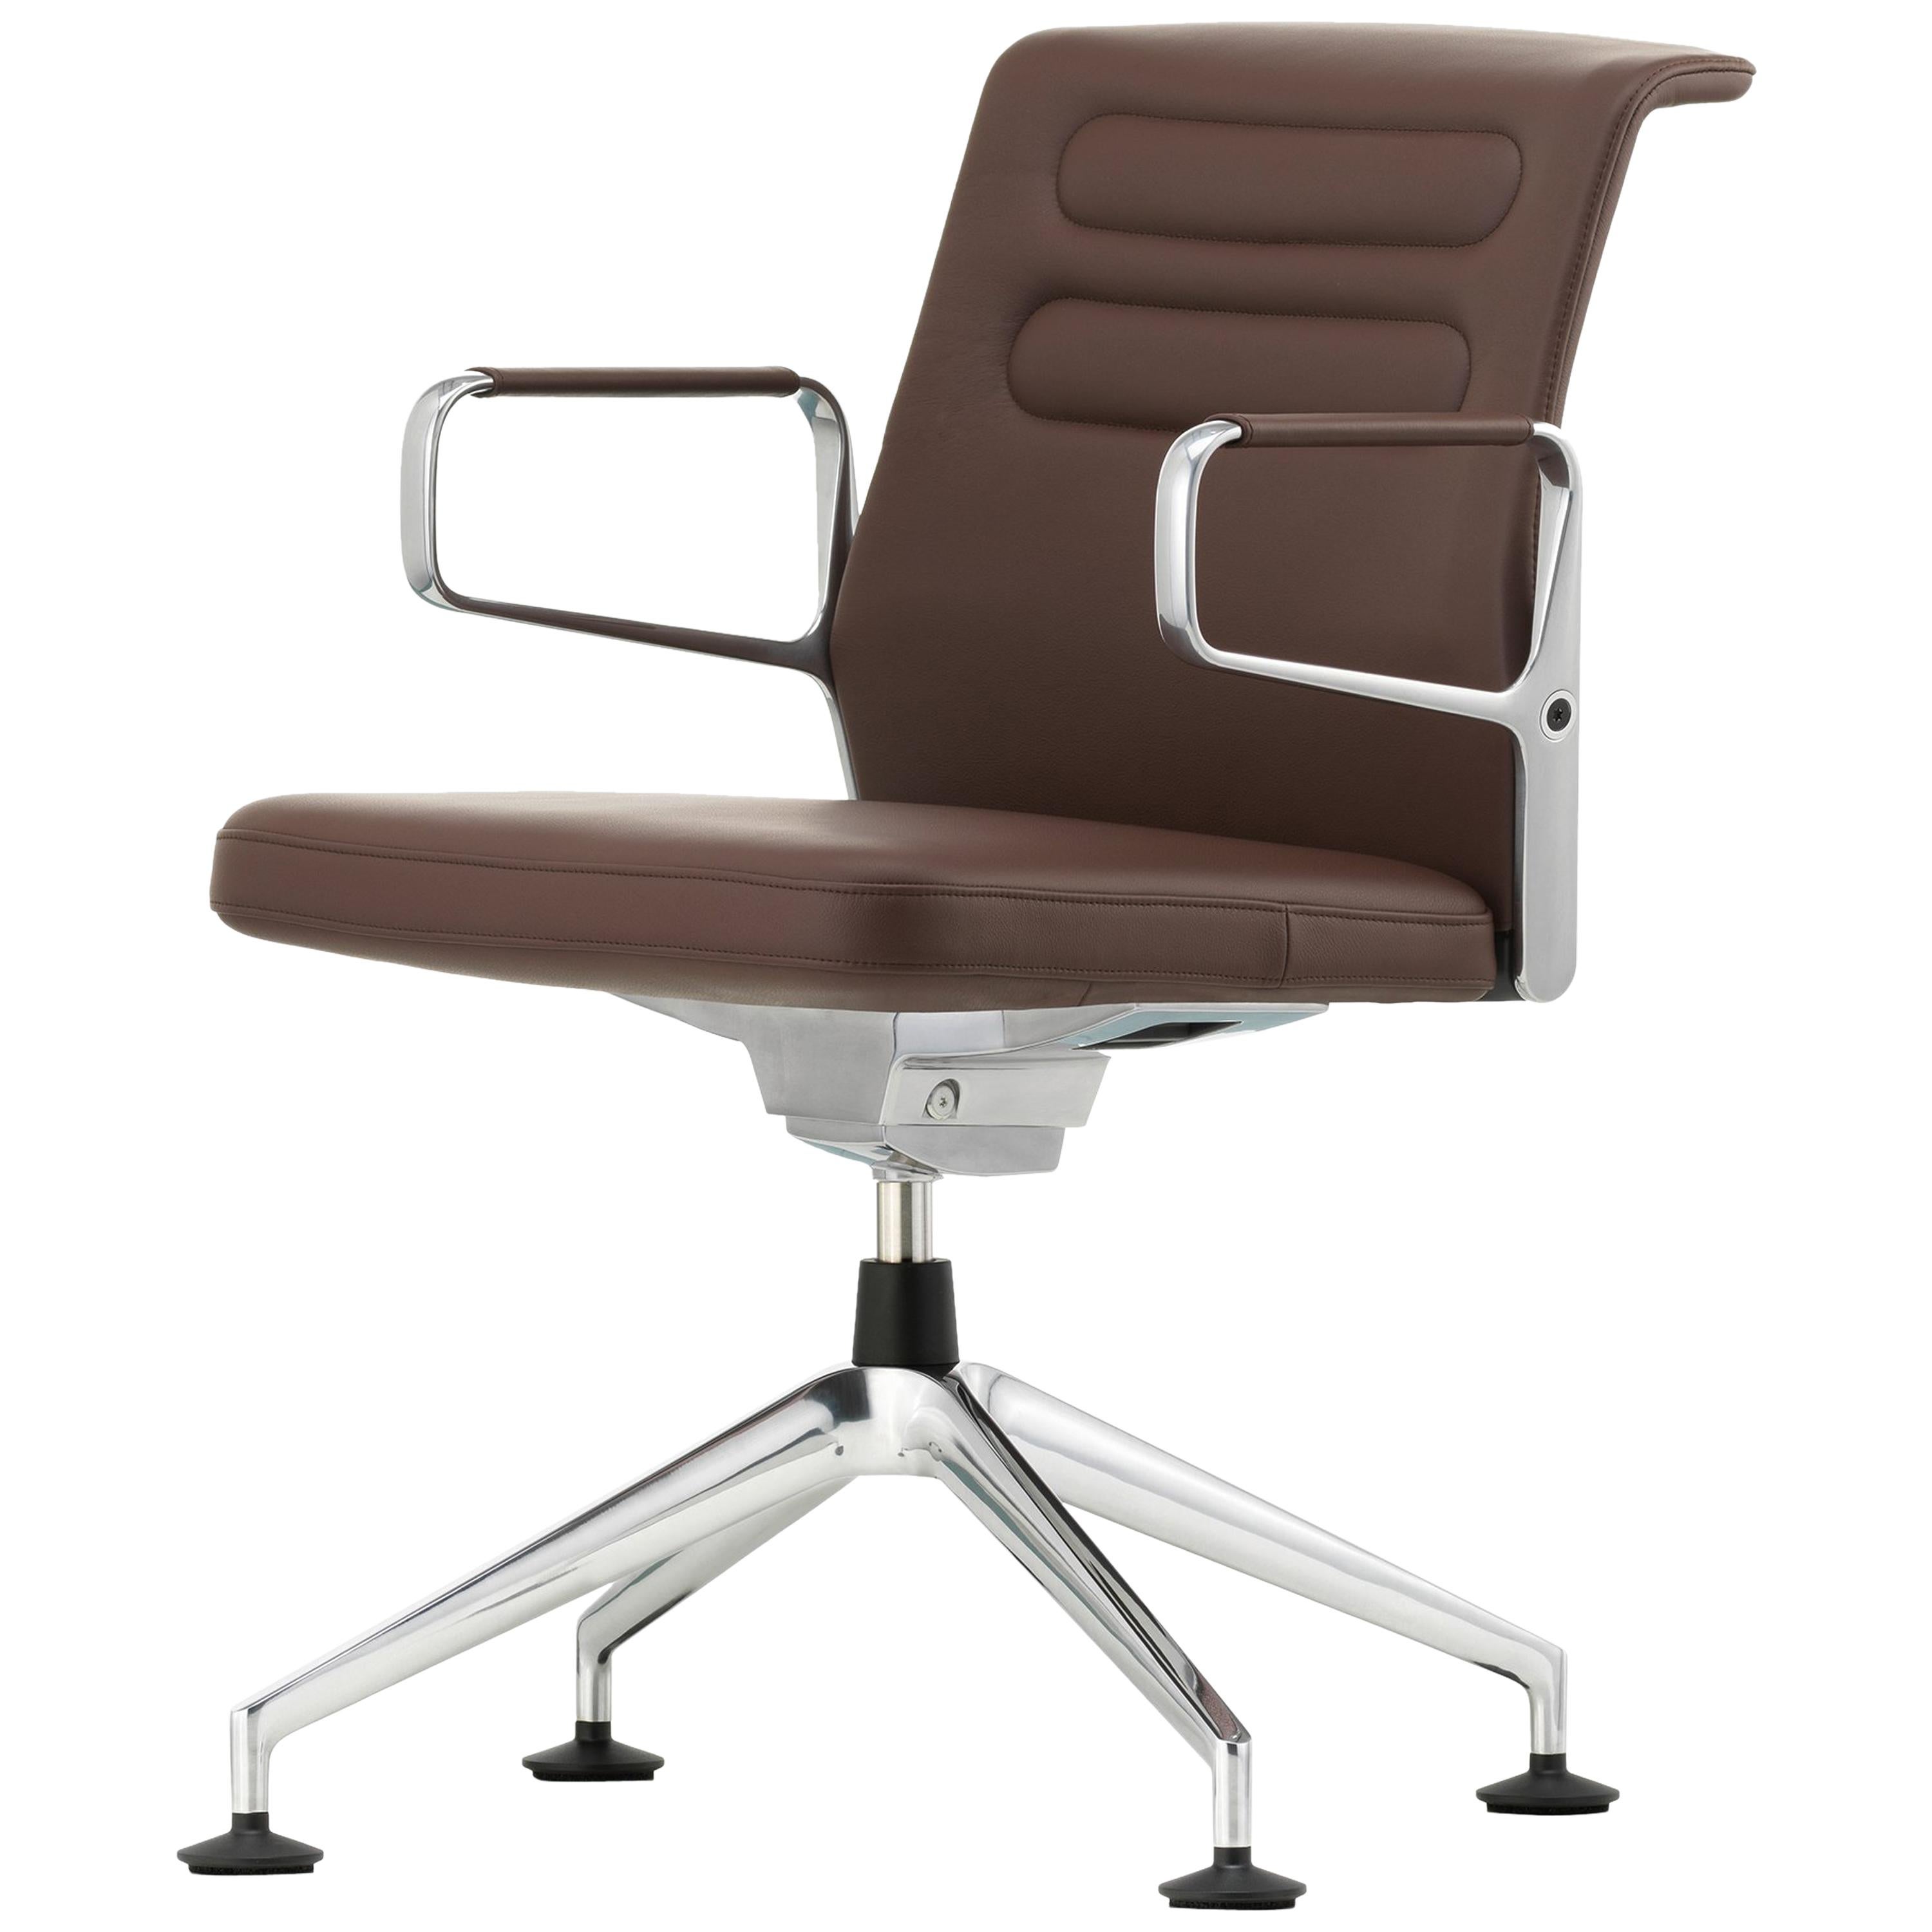 Vitra AC 5 Meet Chair in Marron Leather by Antonio Citterio For Sale